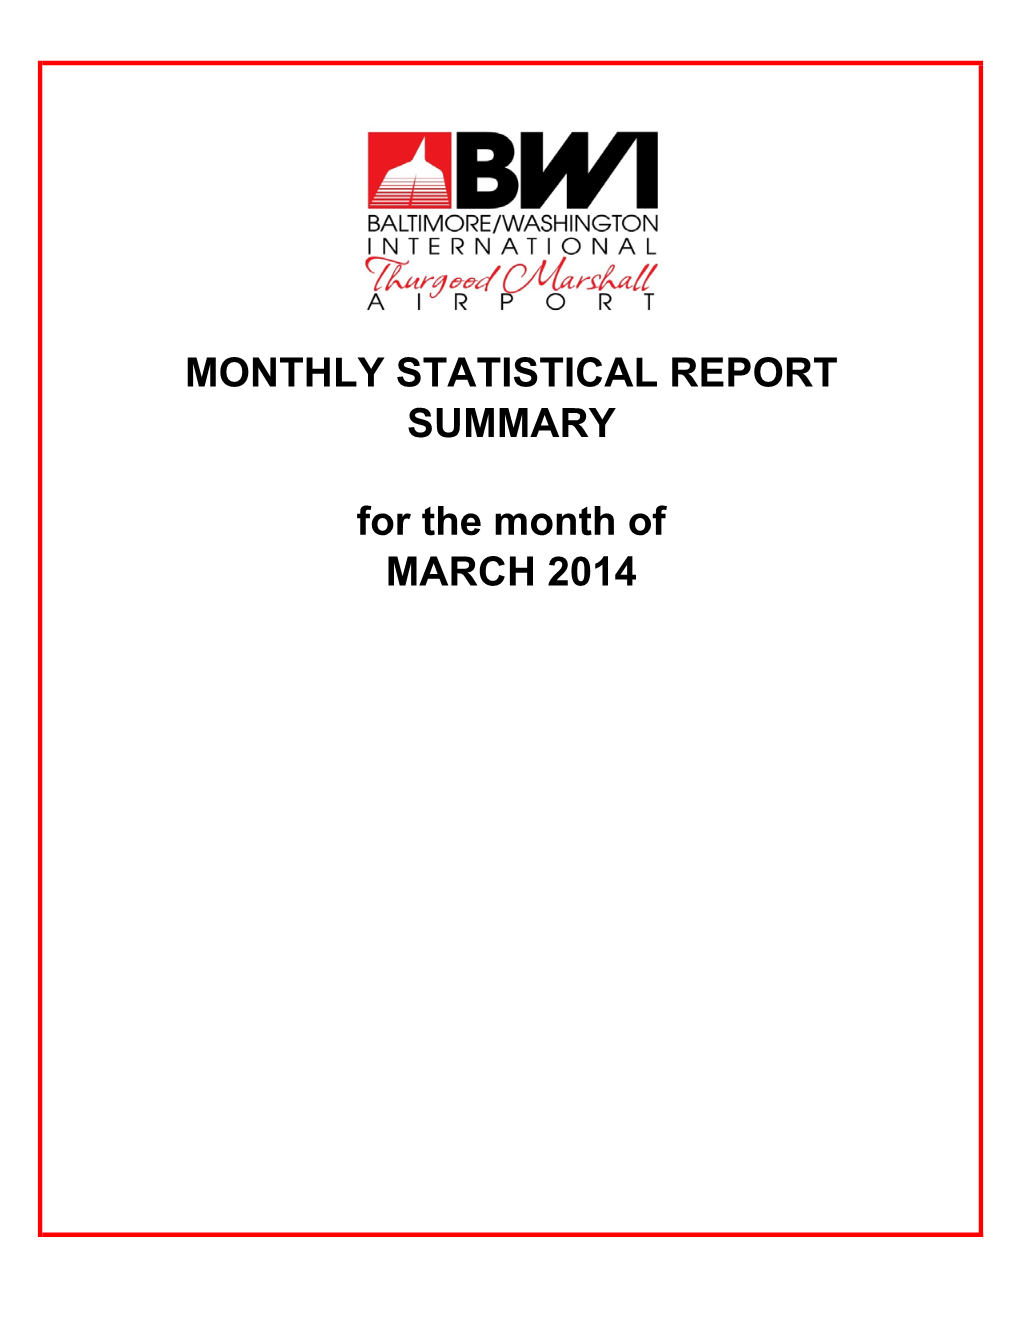 MONTHLY STATISTICAL REPORT for the Month of MARCH 2014